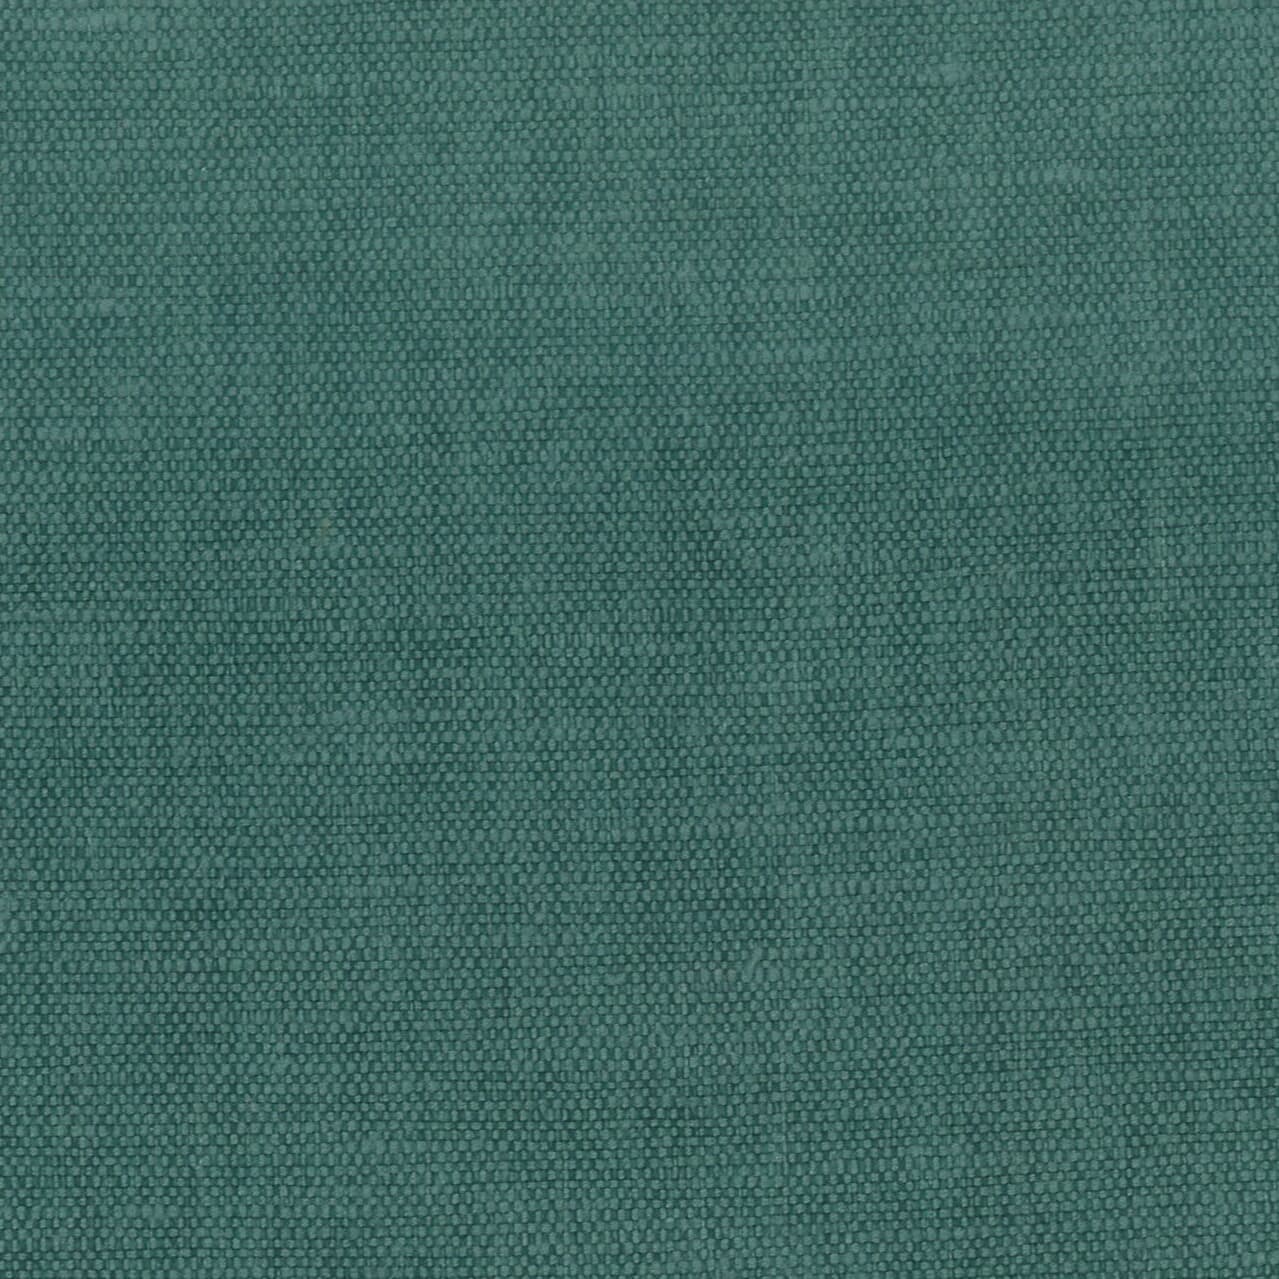 Orwin 13 Teal by Stout Fabric